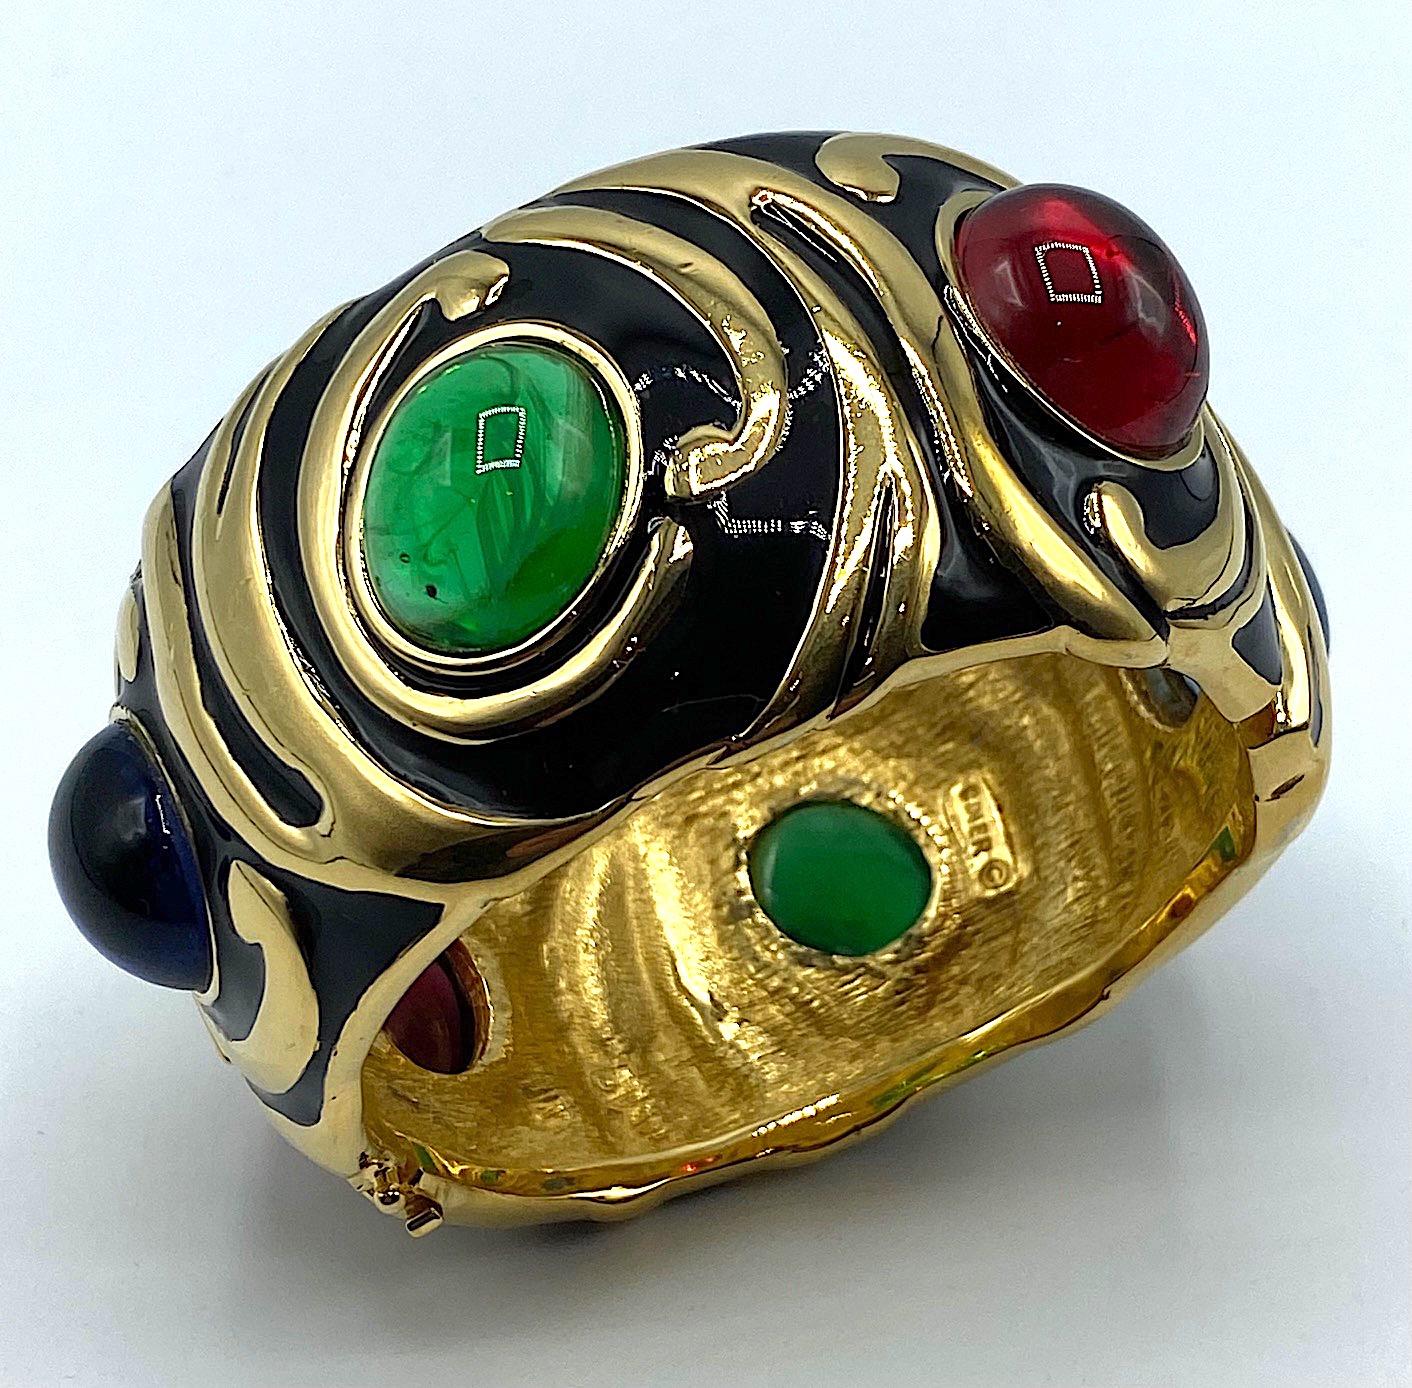 A stunning Ciner of New York bracelet from the 1980s. Beautifully black enameled on gold in a swirling pattern and set with six large red, blue and green .The green glass cabochons have streaks of white to emulate the inclusions in natural emeralds.